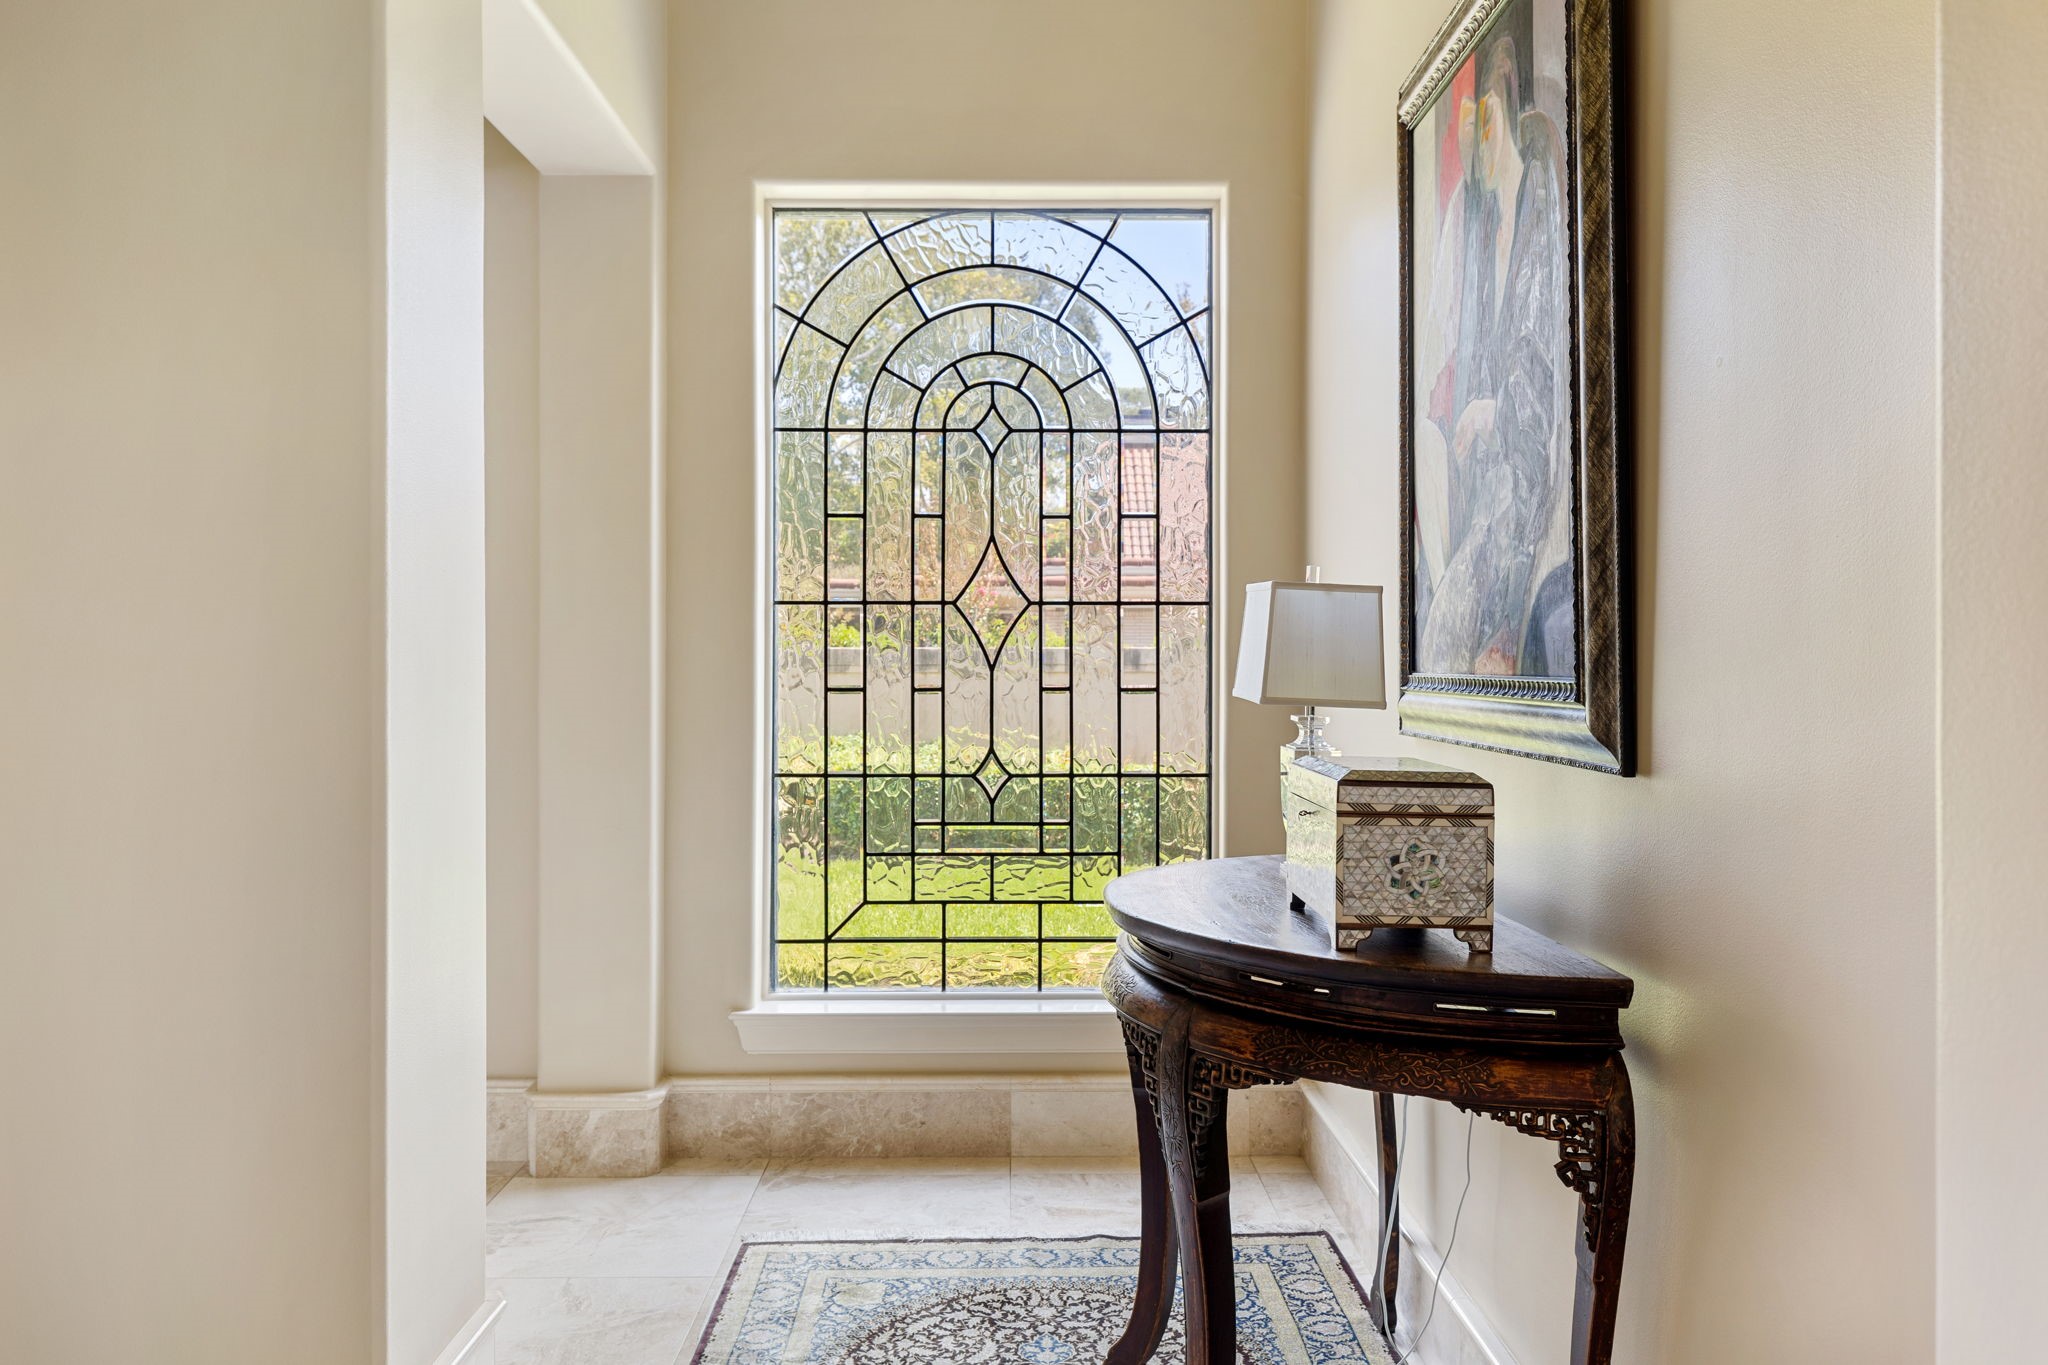 On the final axis of the Grand Foyer is a artful, private hallway that welcomes you to the secluded Master Suite. A gorgeous custom leaded glass window adds prisms of clear light to the space.